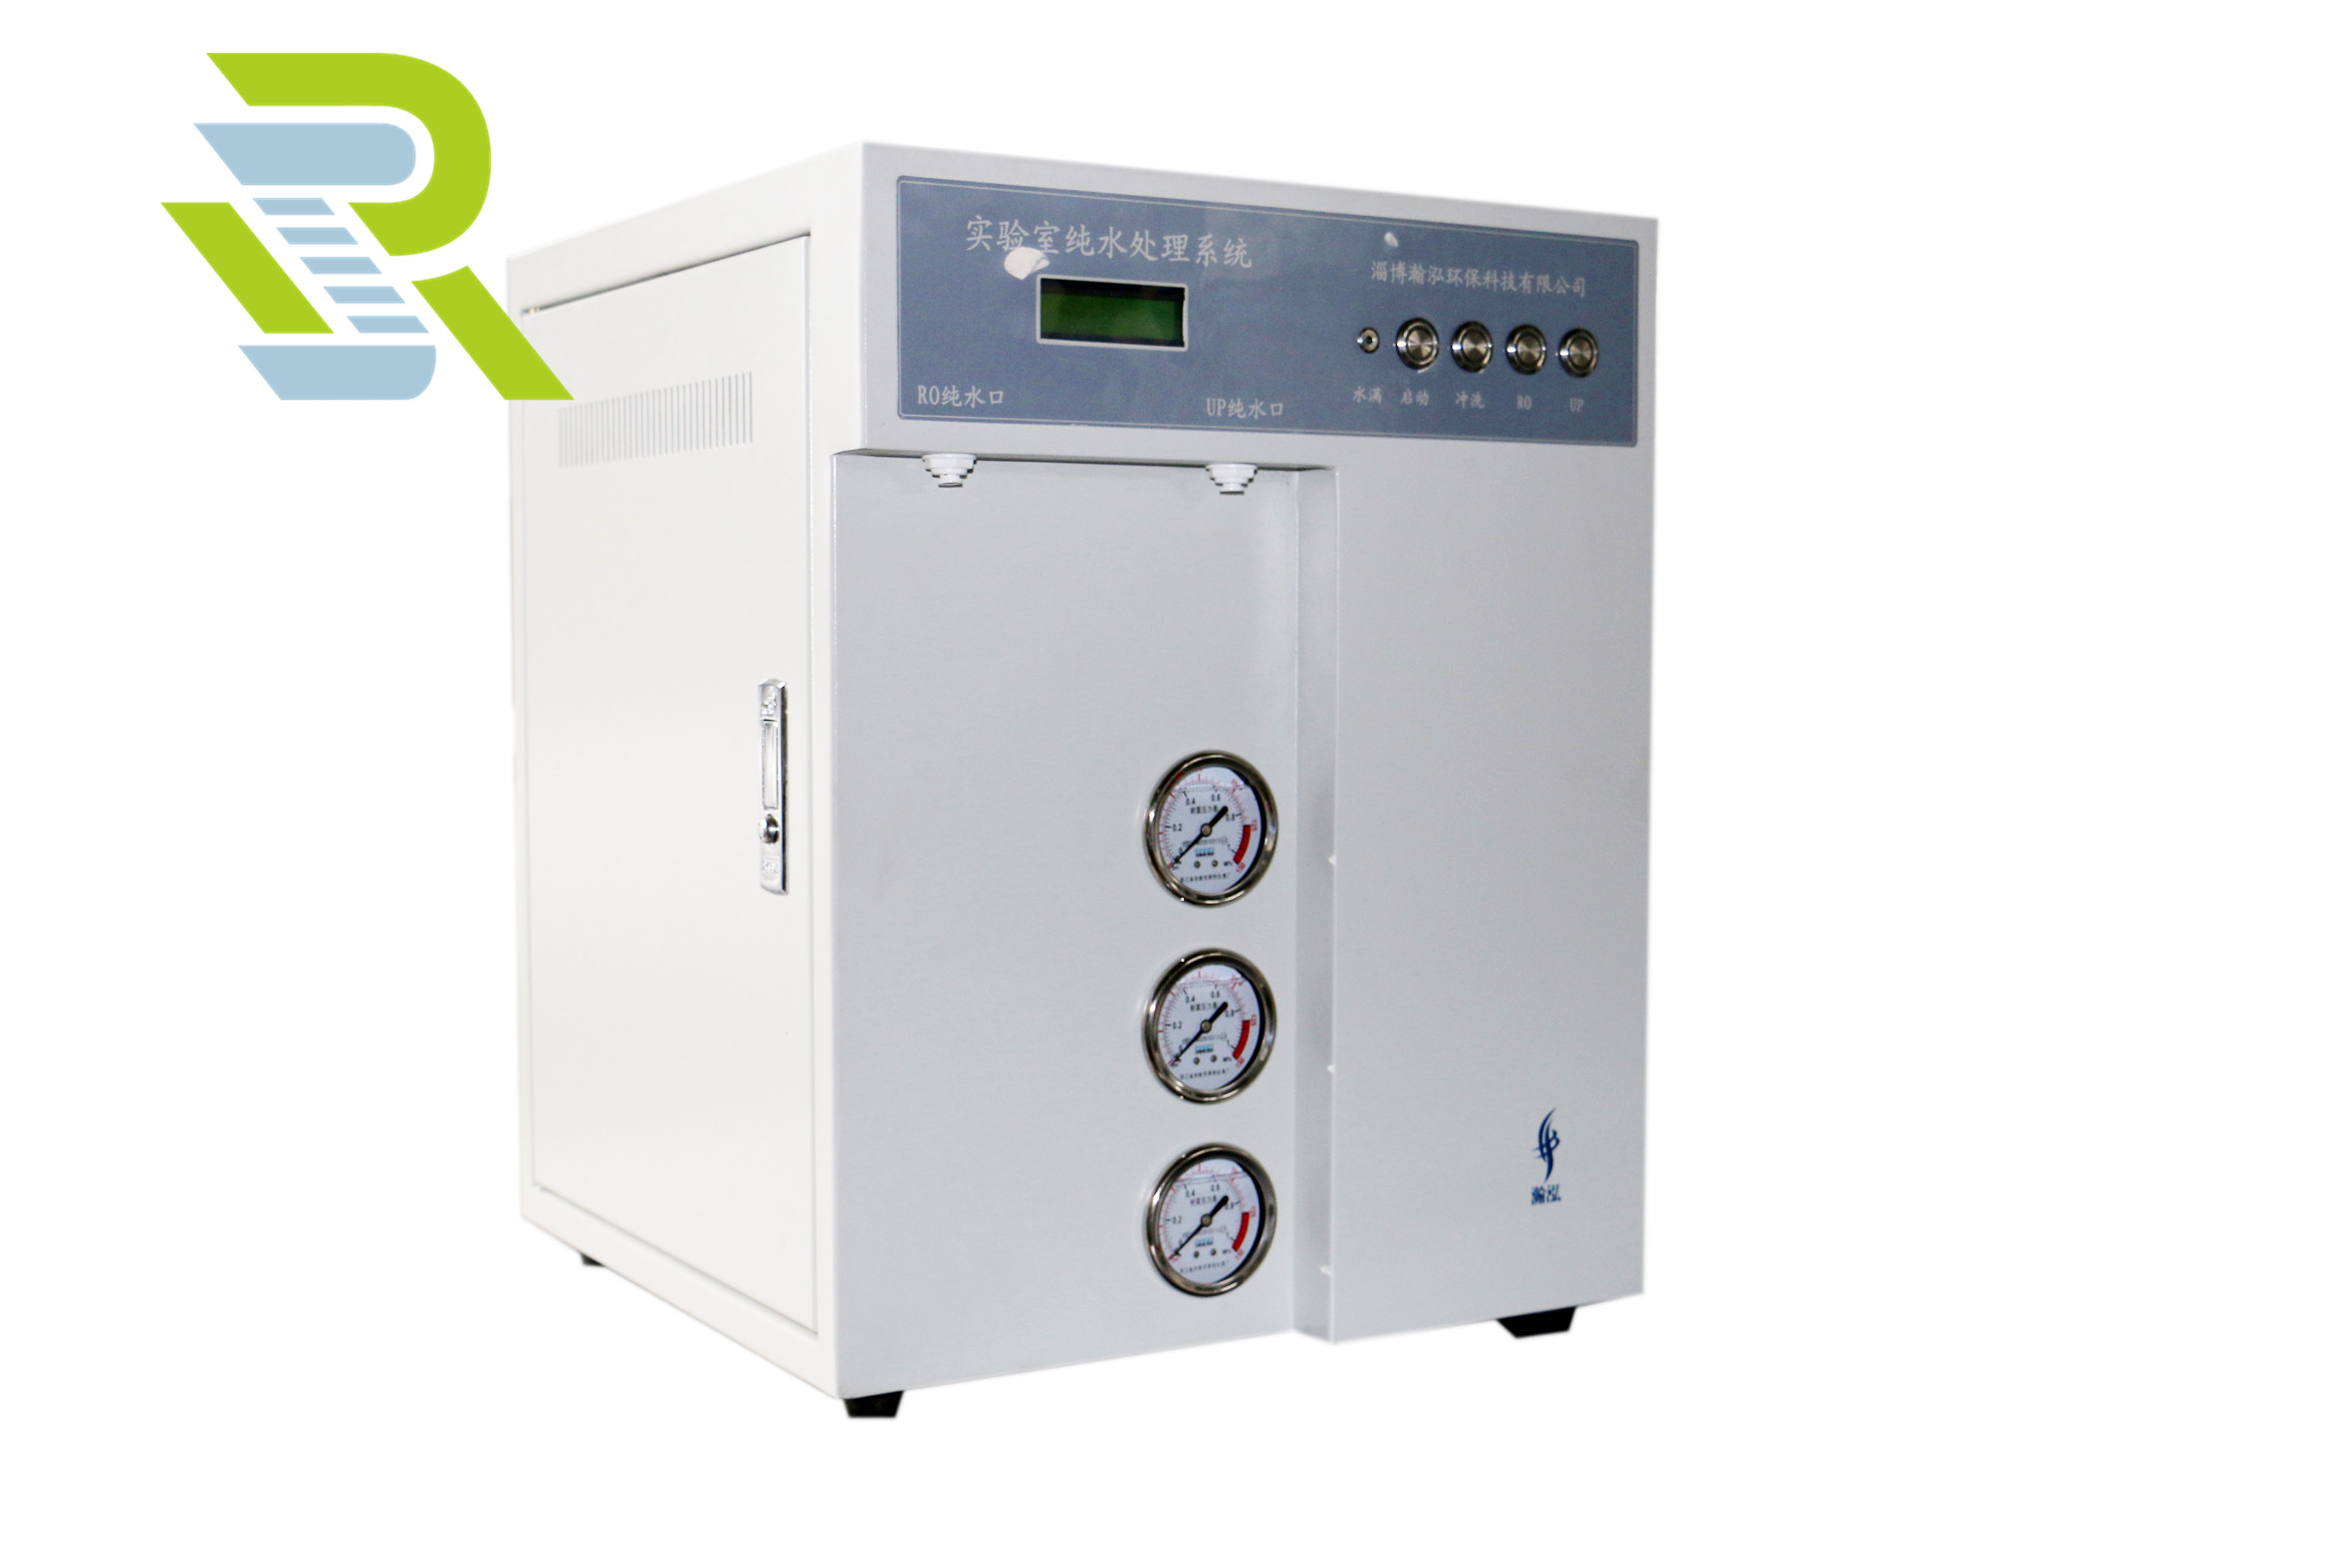 Ultra pure water treatment machine for Laboratory department